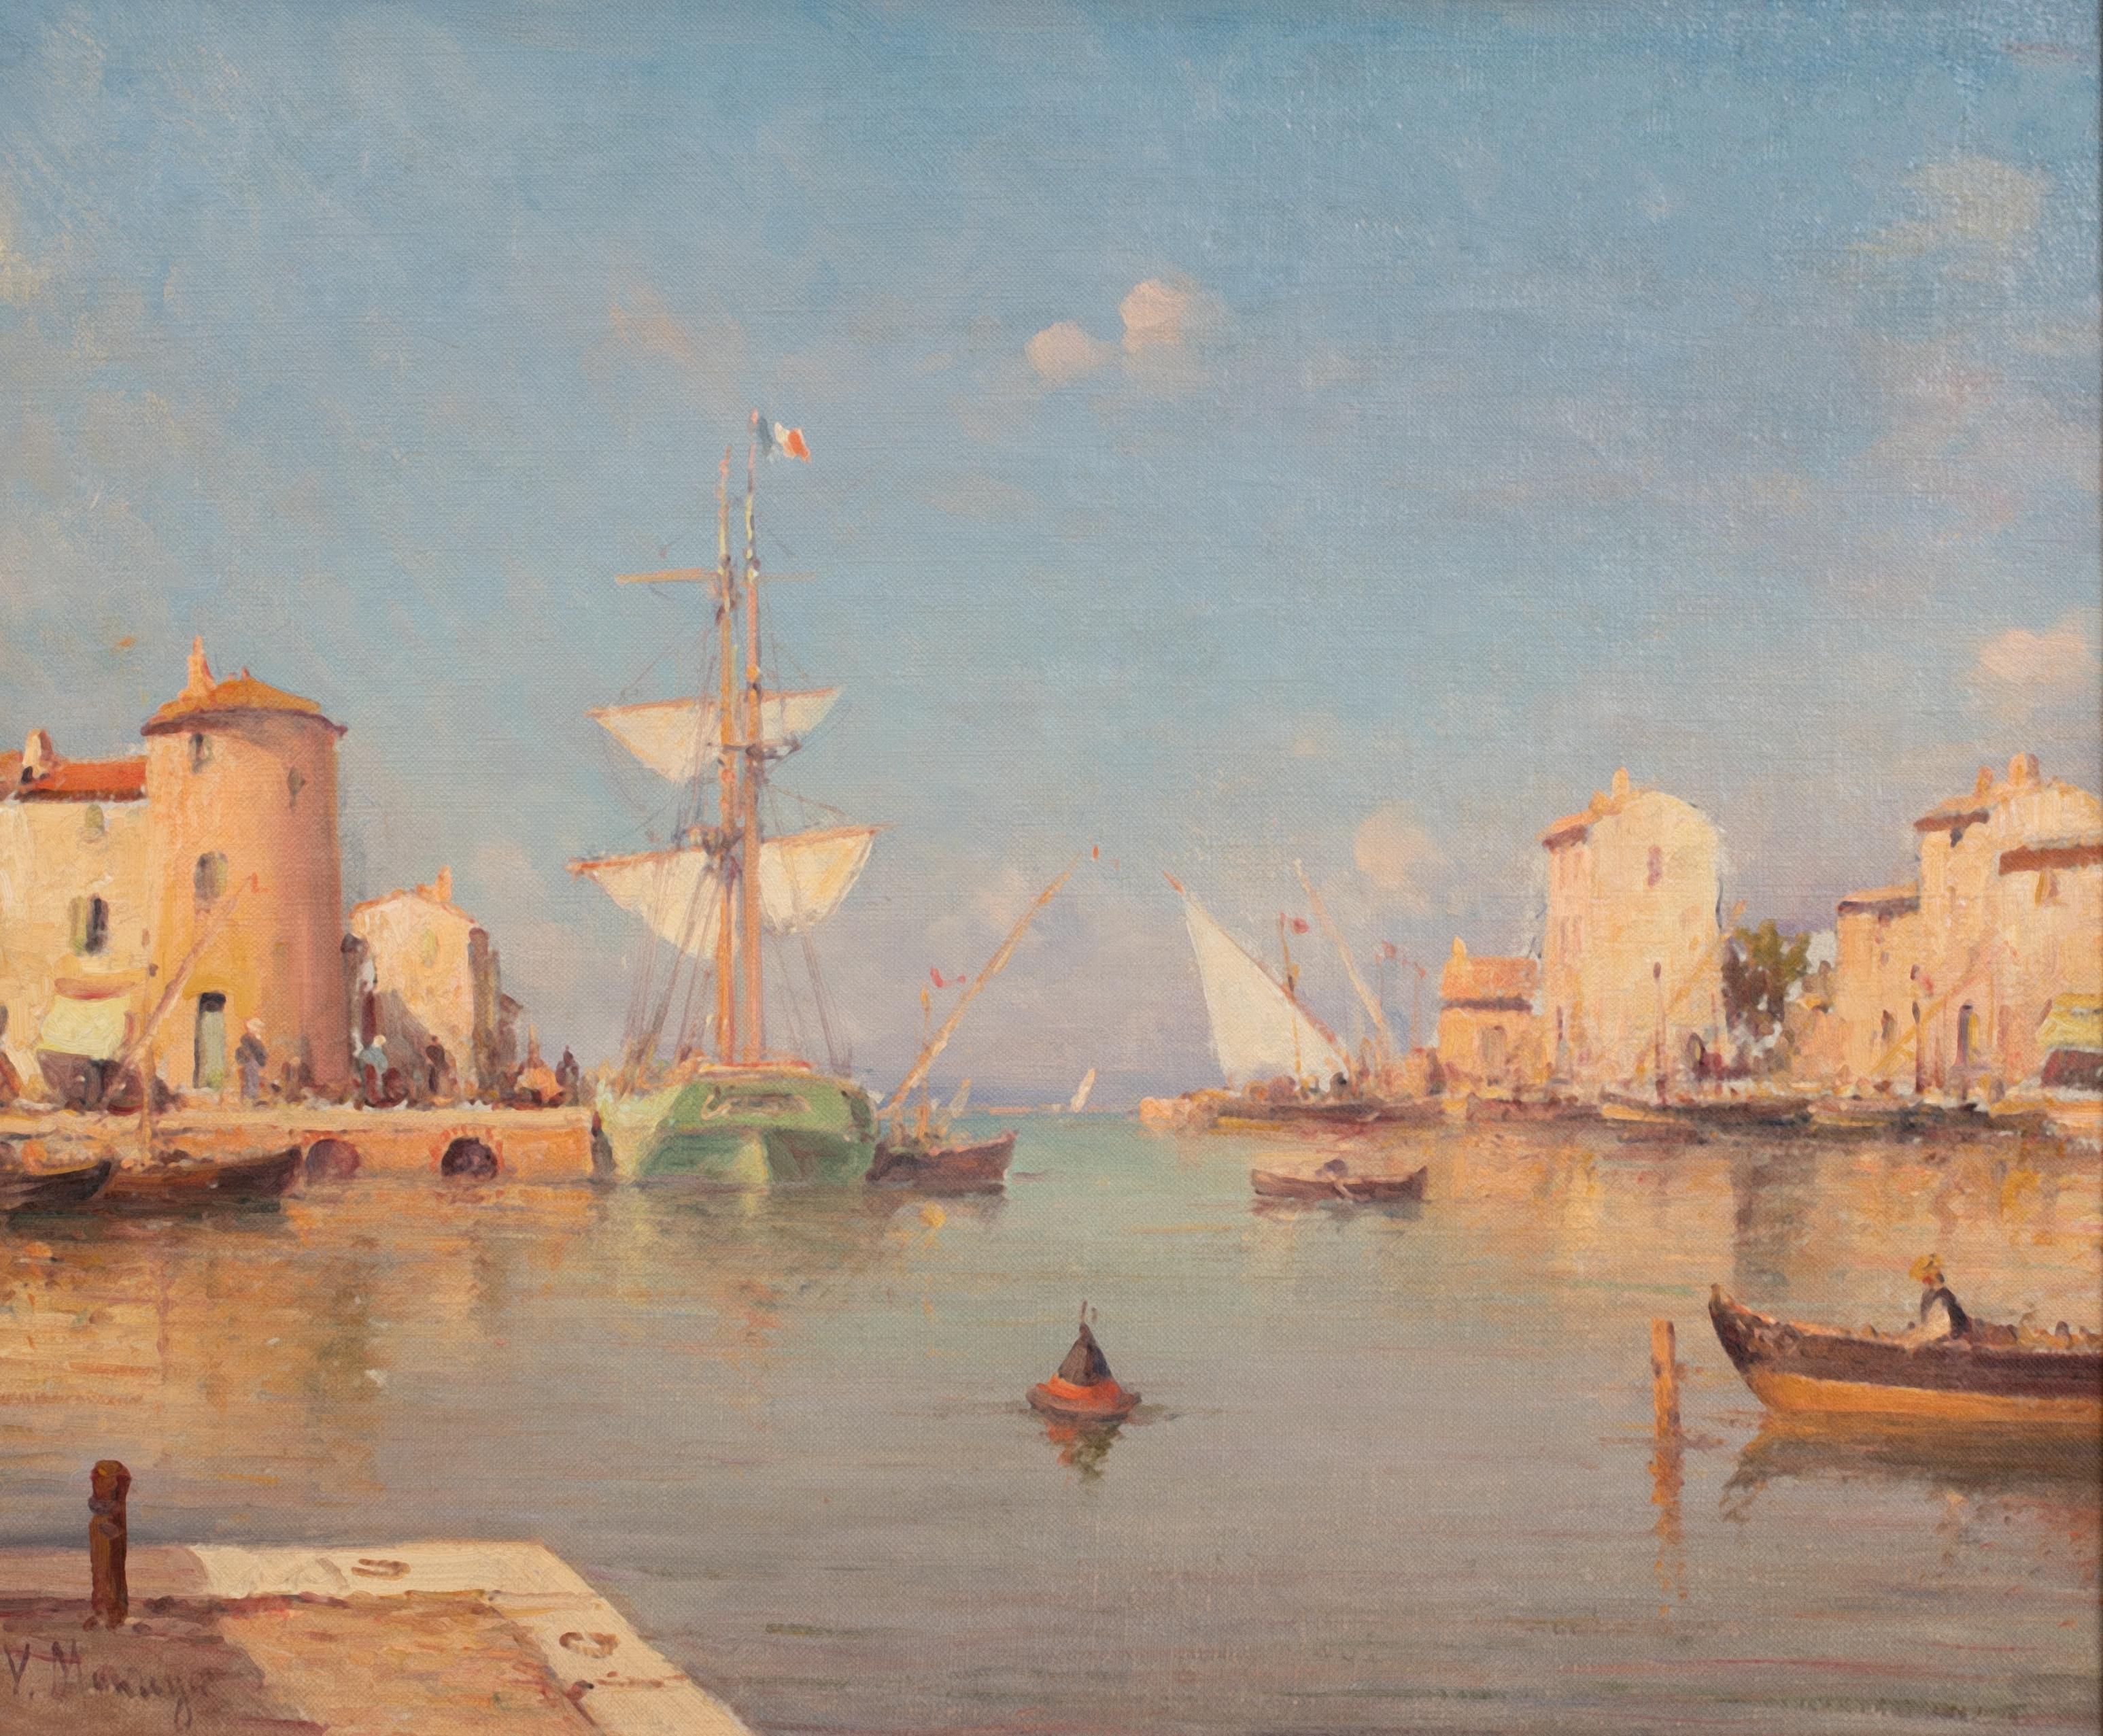 Les Martigues, circa 1900

Vincent MANAGO (1880-1936) to $18,000

Large circa 1900 French harbour view of Les Martigues, oil on canvas by Vincent Manago. Excellent quality and condition view at Les Martigues, Marseille in summer. Signed and